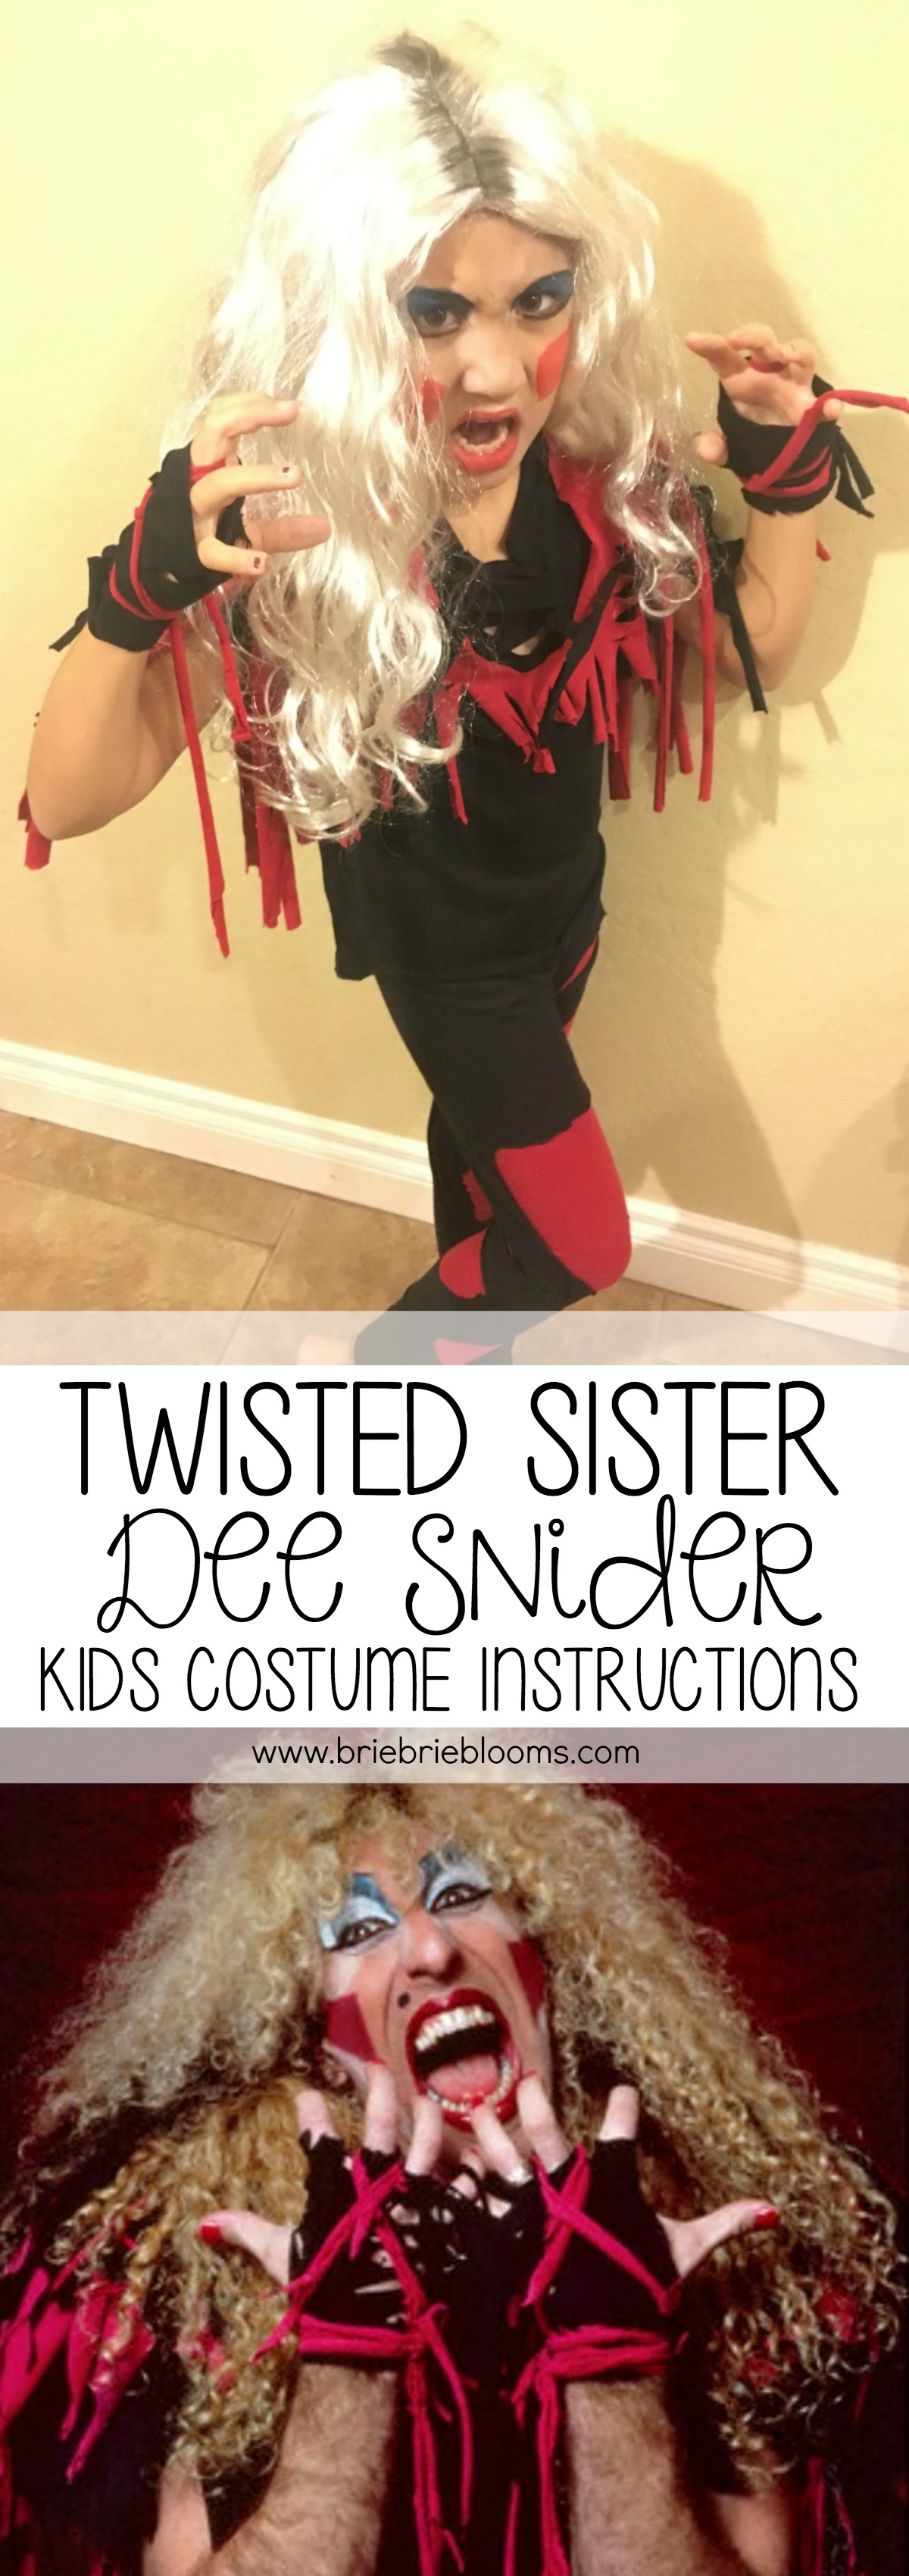 Make this easy Twisted Sister Dee Snider kids costume when your kid wants to dress up like an 80's heavy metal icon!